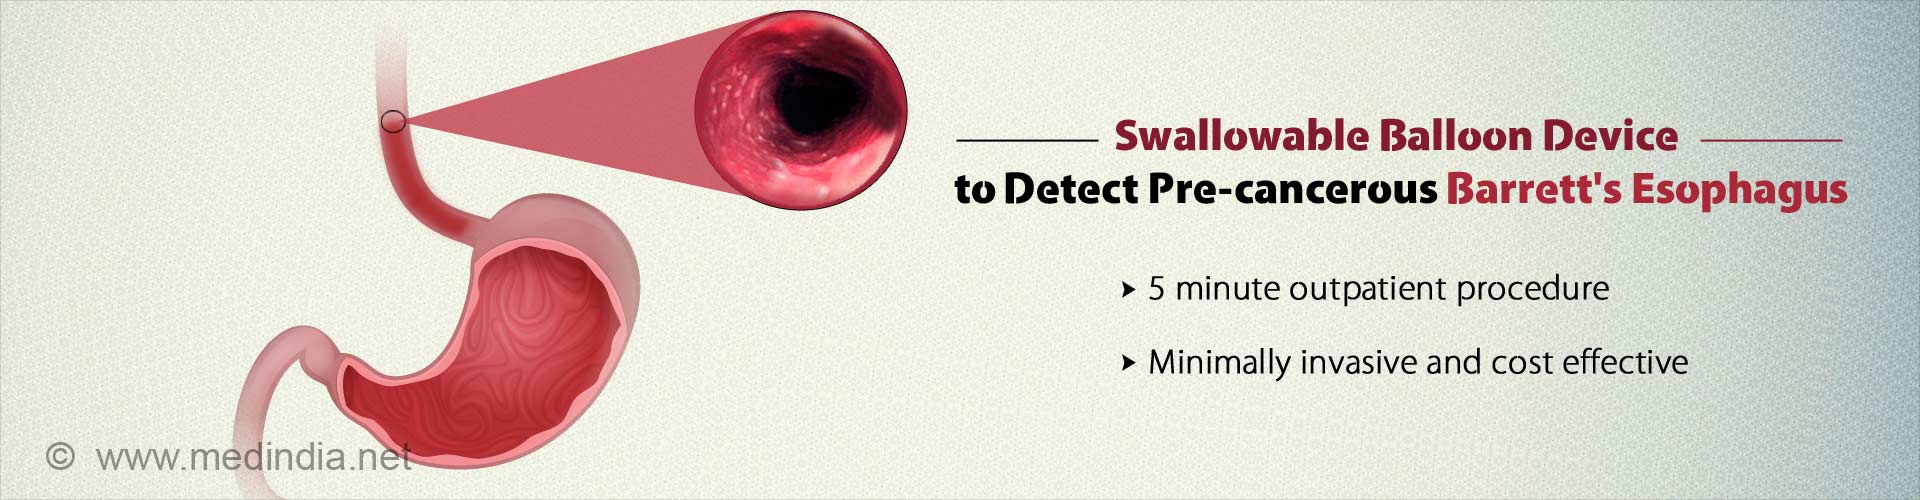 Swallowable balloon device to detect pre-cancerous Barrett's Esophagus
- 5 minute out-patient procedure
- Minimally invasive and cost-effective